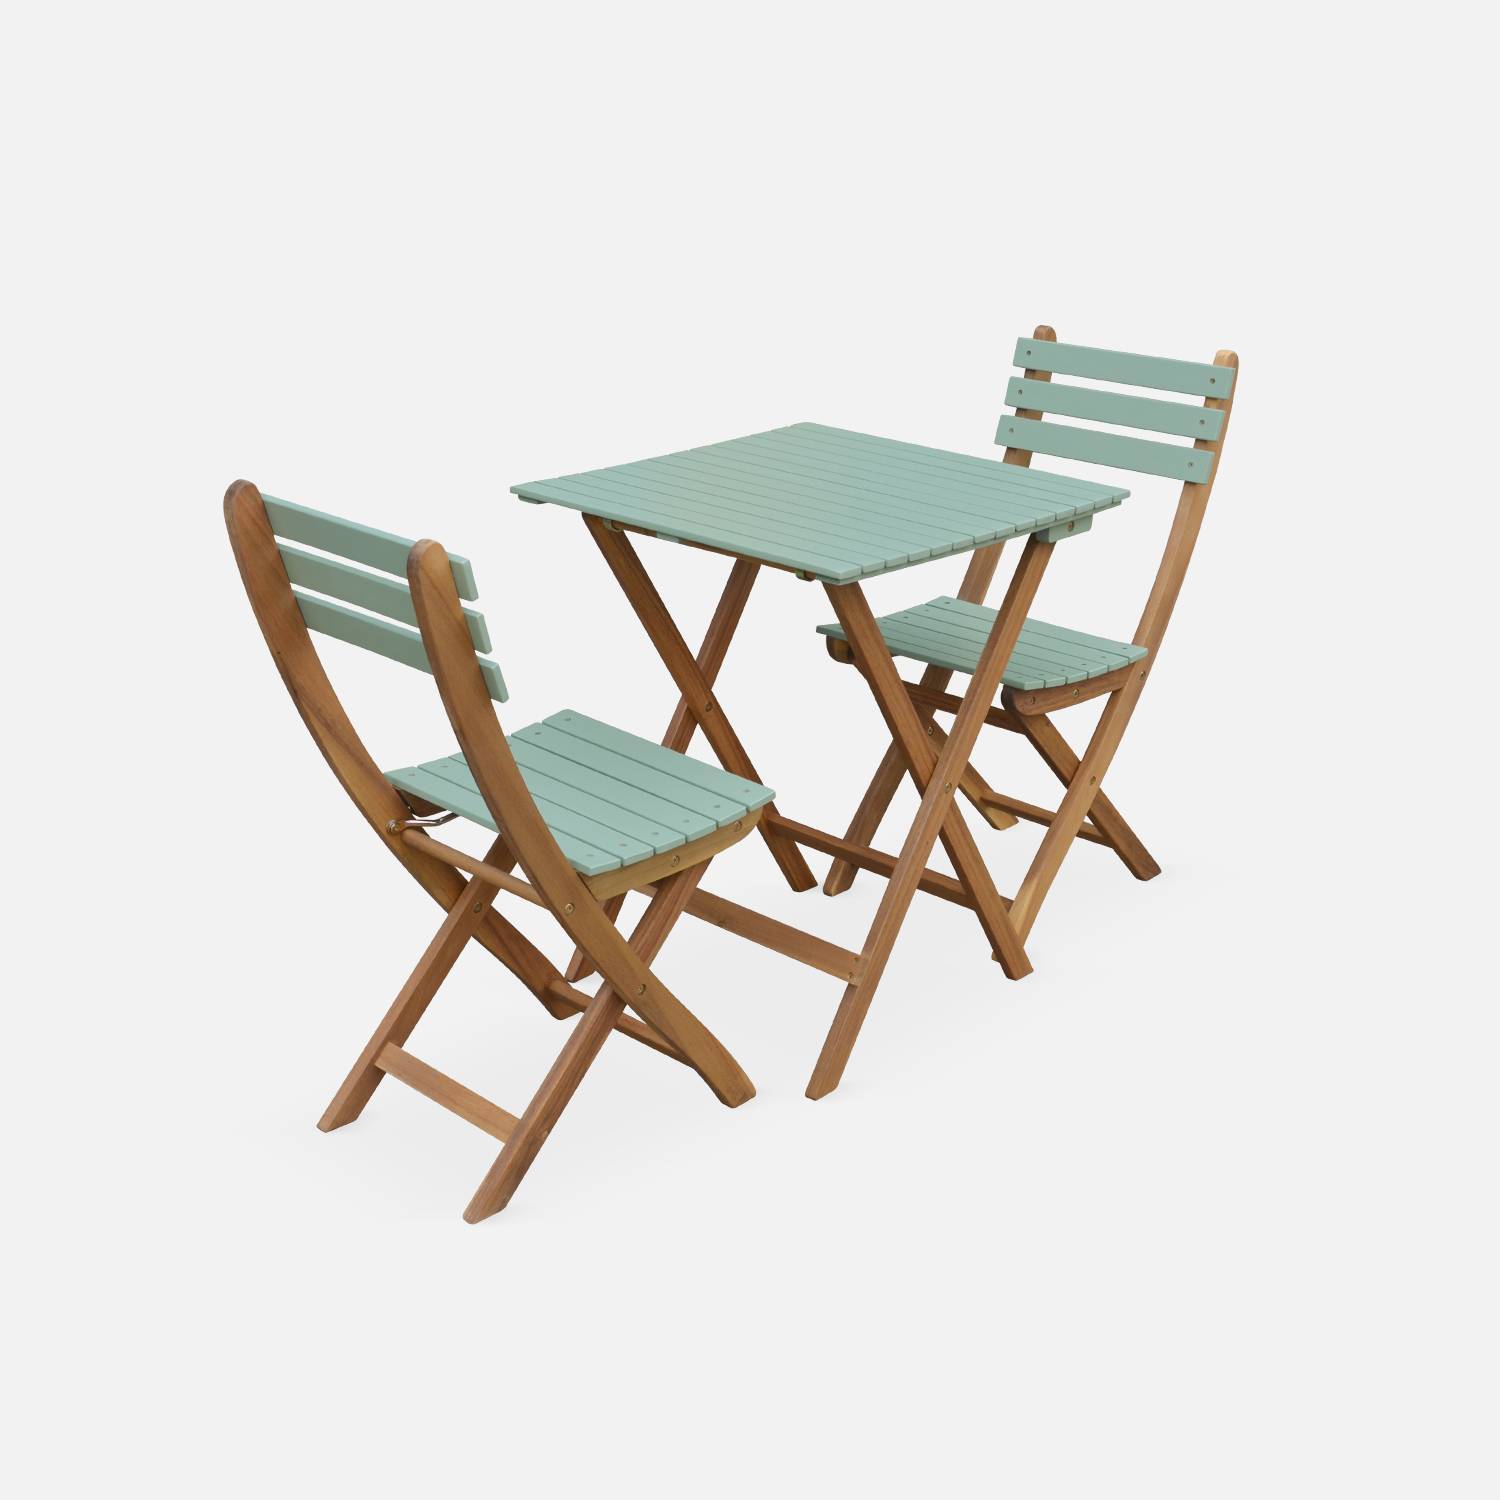 2-seater foldable wooden bistro garden table with chairs, 60x60cm, Sage Green | sweeek